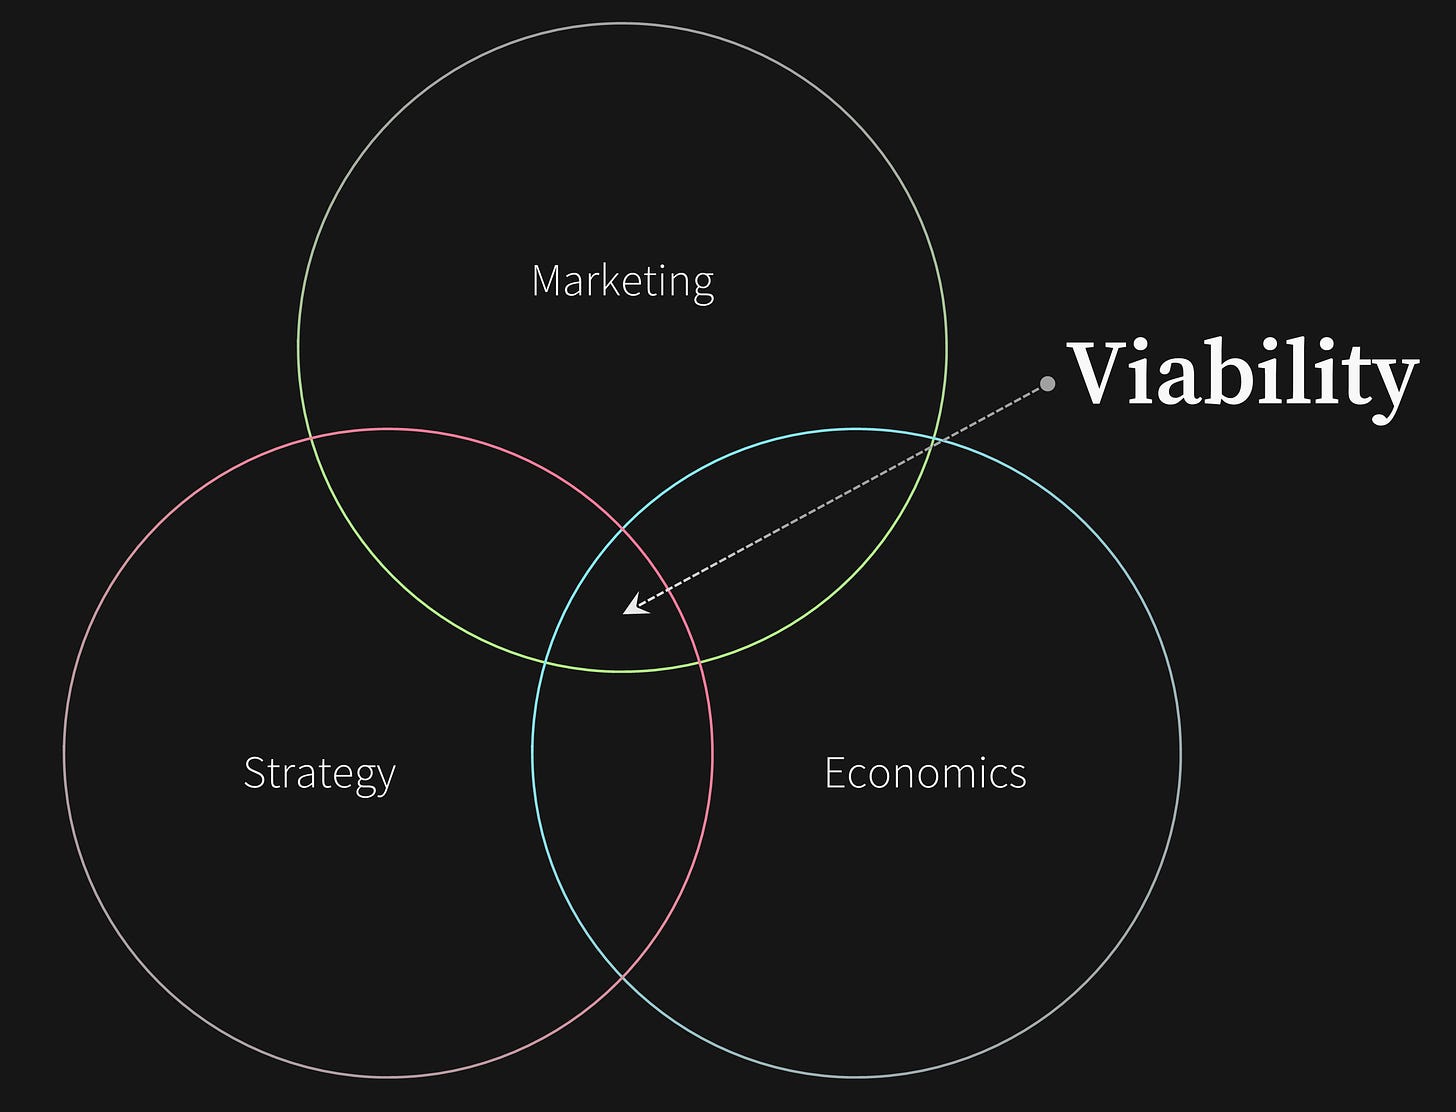 There are three distinct, but related aspects to consider when evaluating the viability of a business idea.